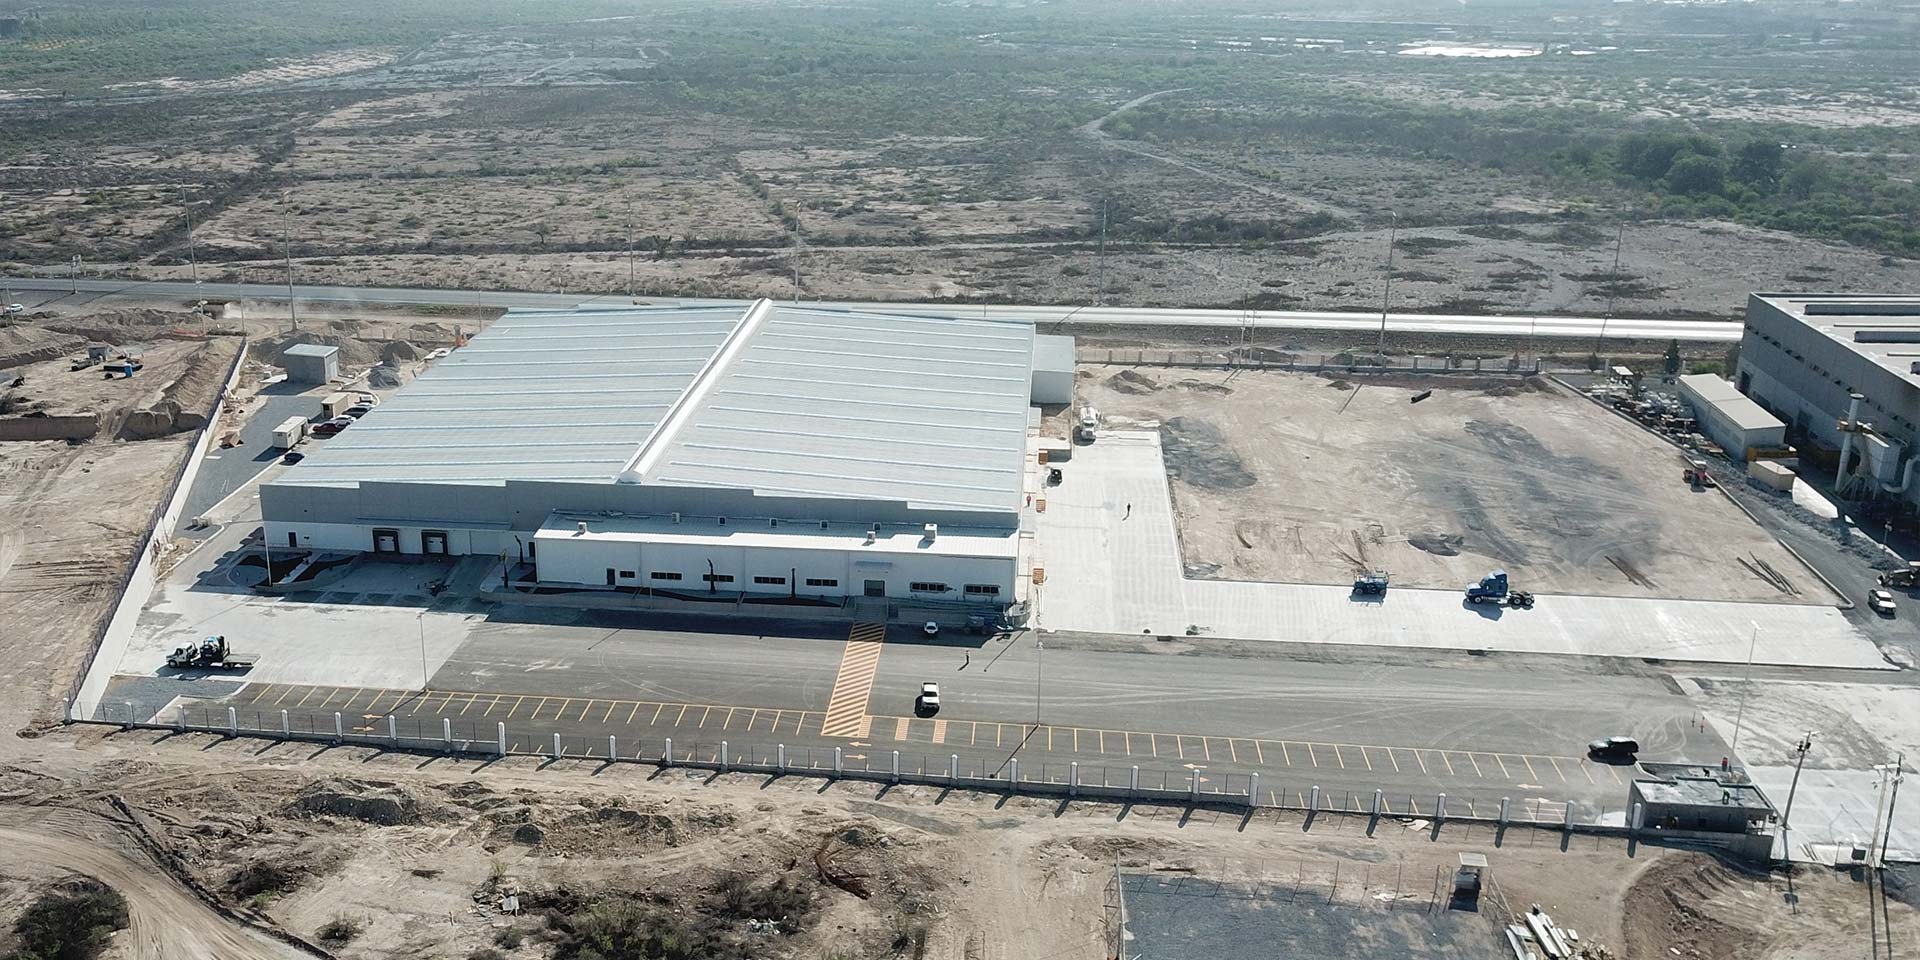 Drone photograph of a DAVISA industrial park building operated by Kodaco